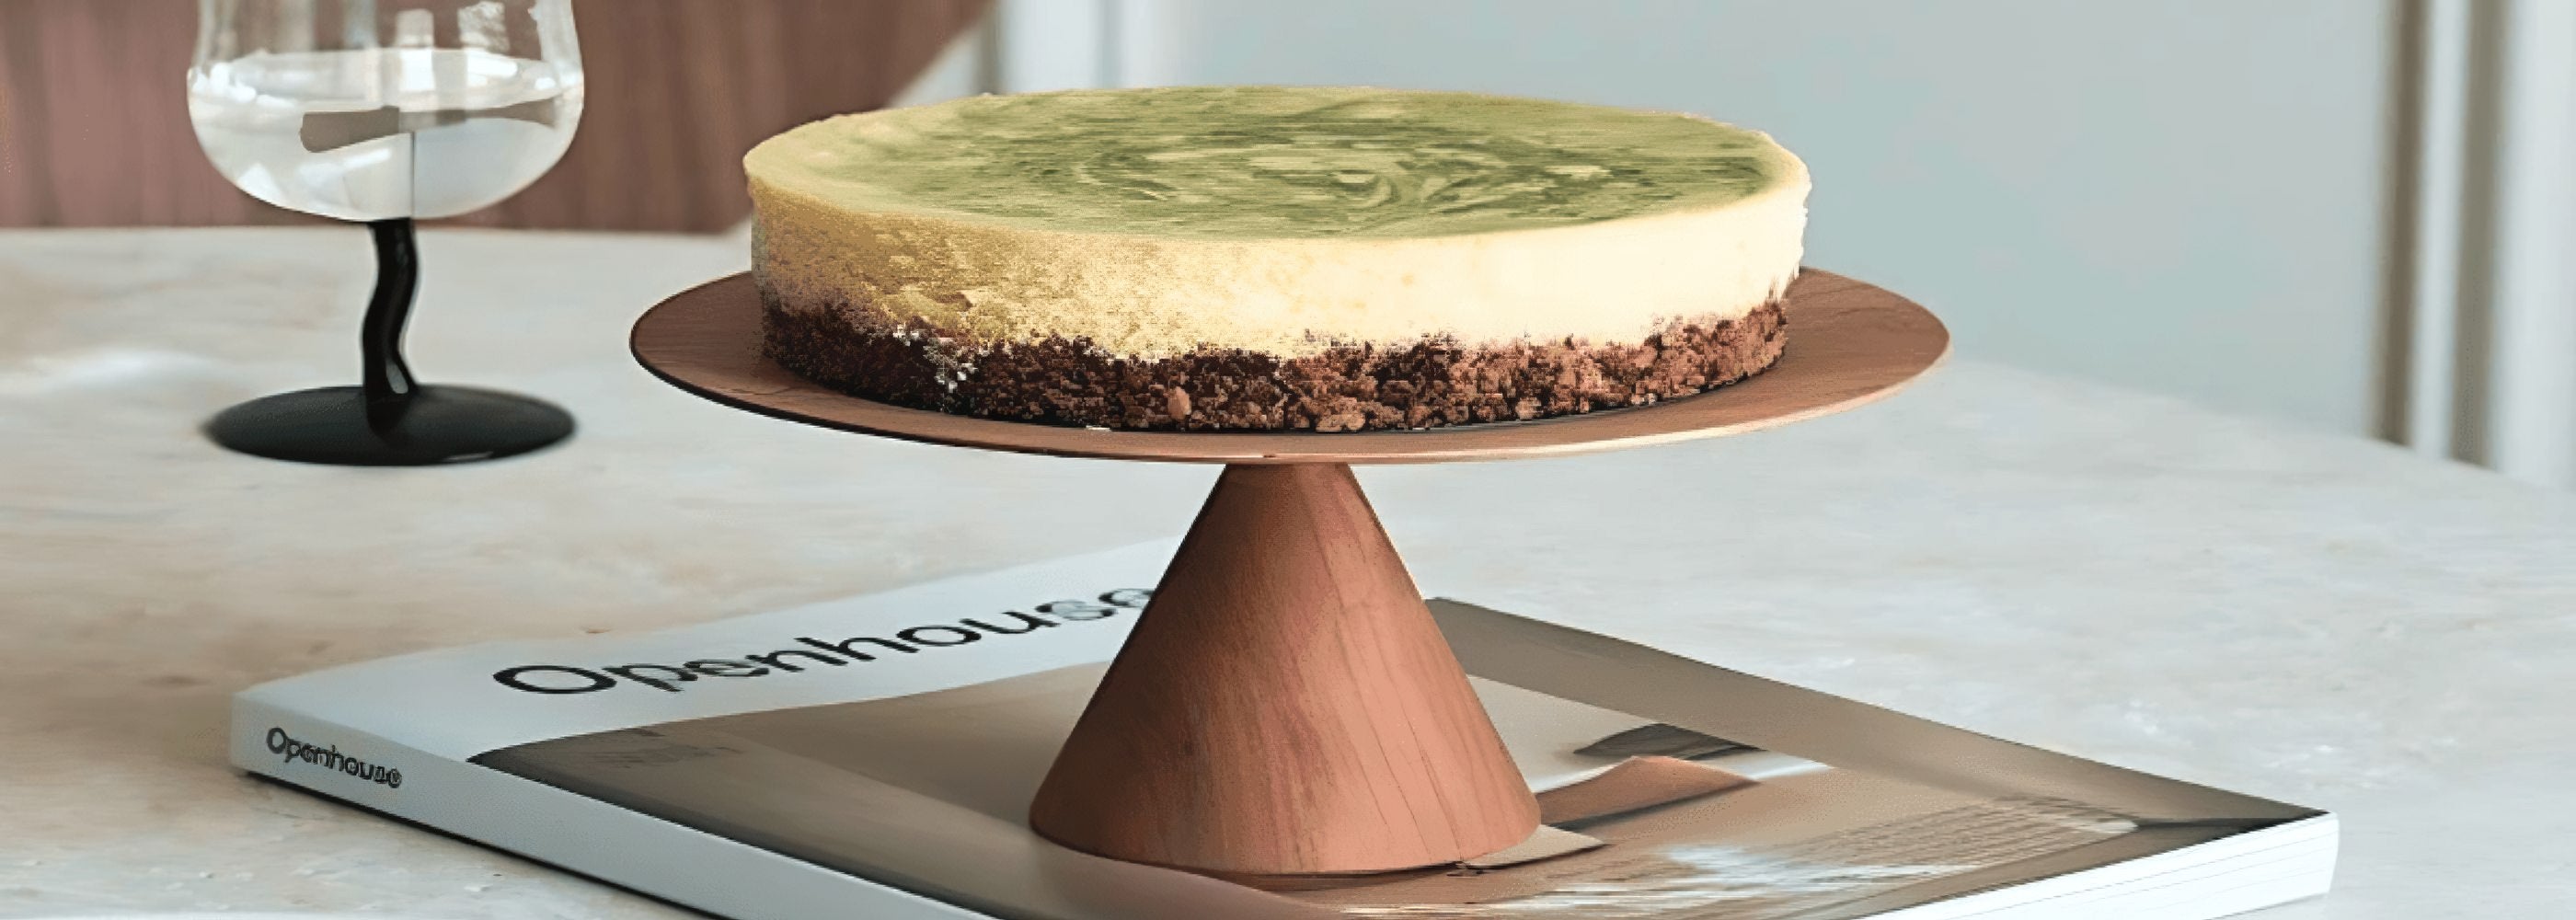 Elevated round wood tray with cake image banner